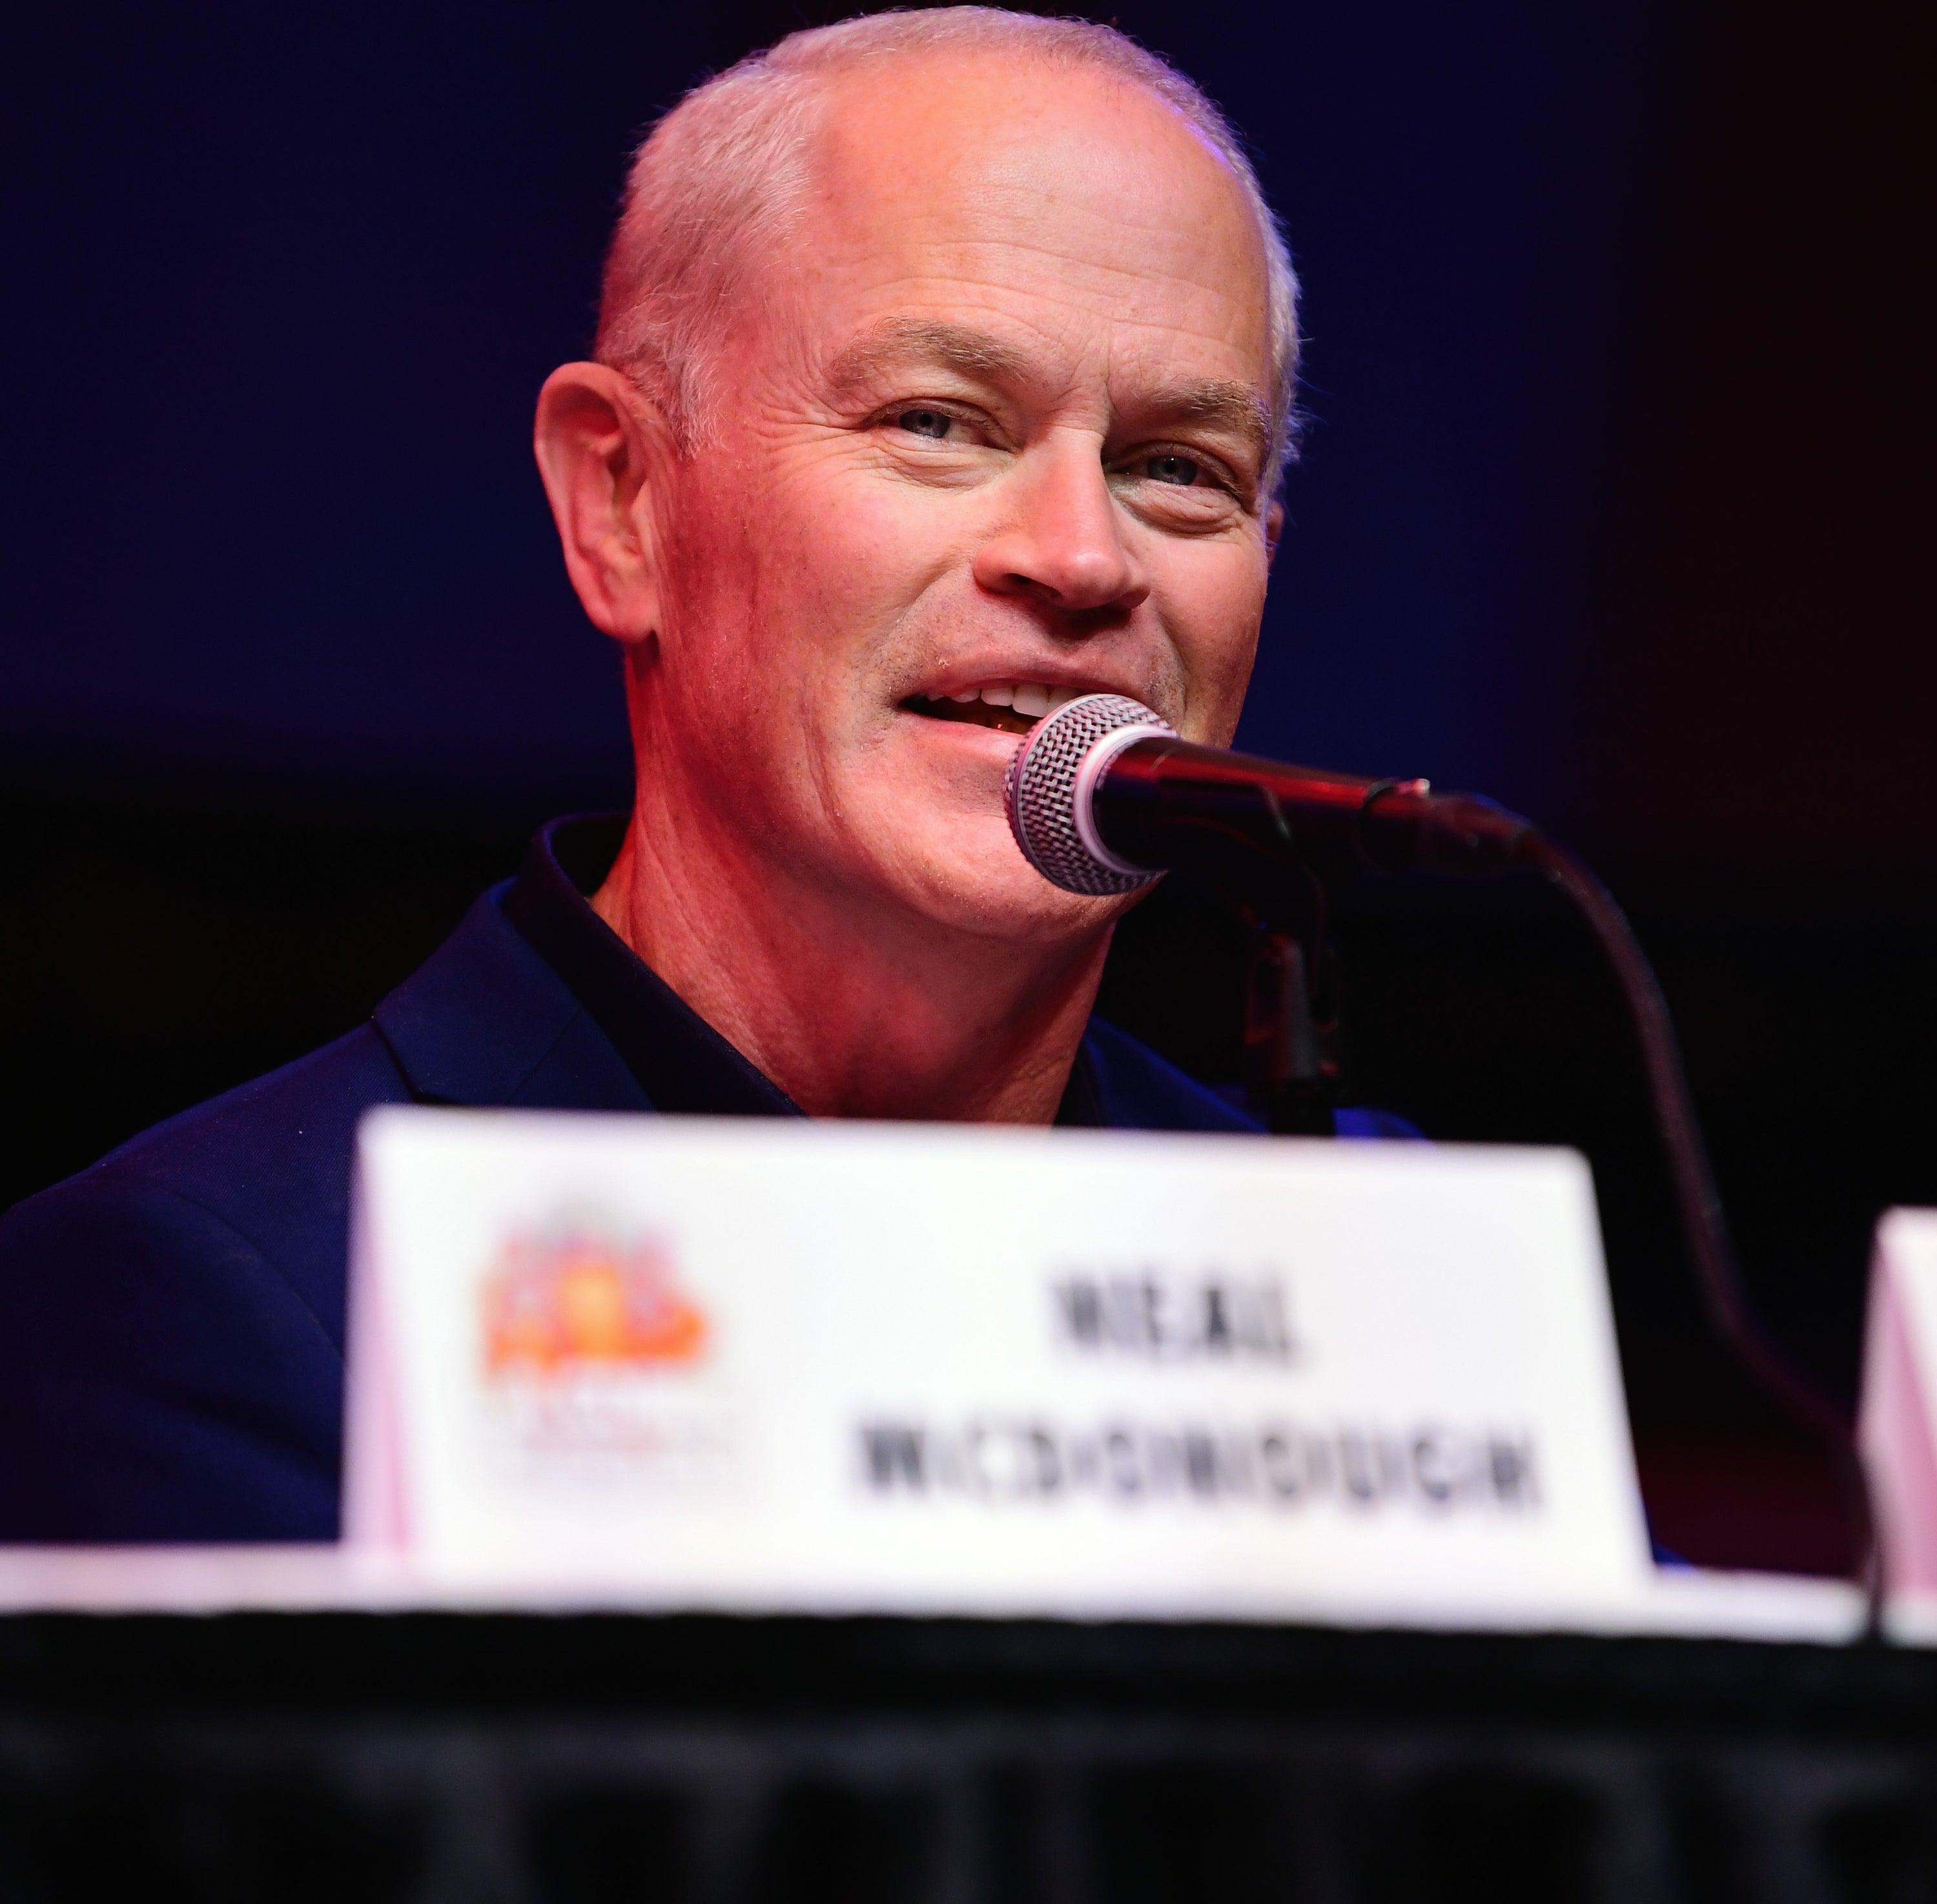 Neal McDonough on an &quot;Arrow&quot; panel at Comic Con in late 2021